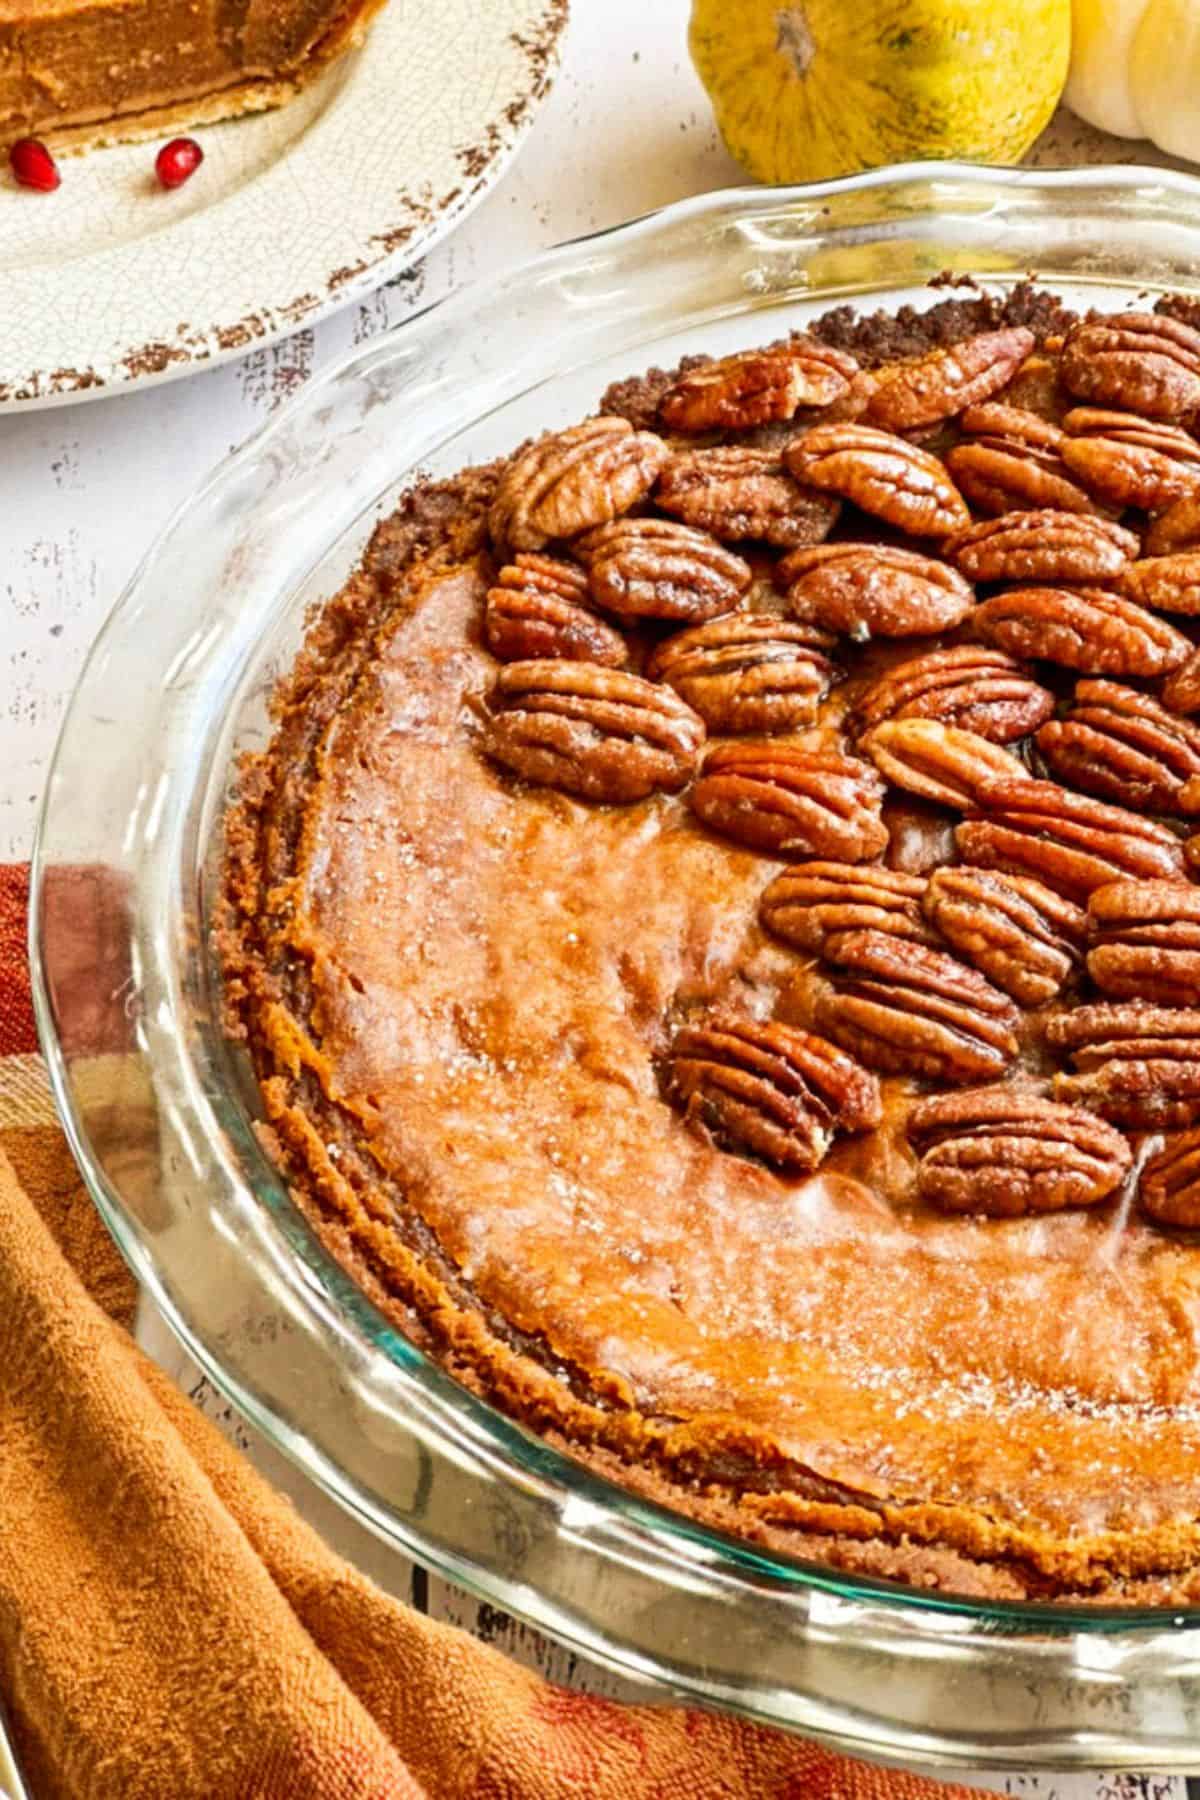 Pumpkin Pie with Graham Cracker Crust Pie topped with candied pecans